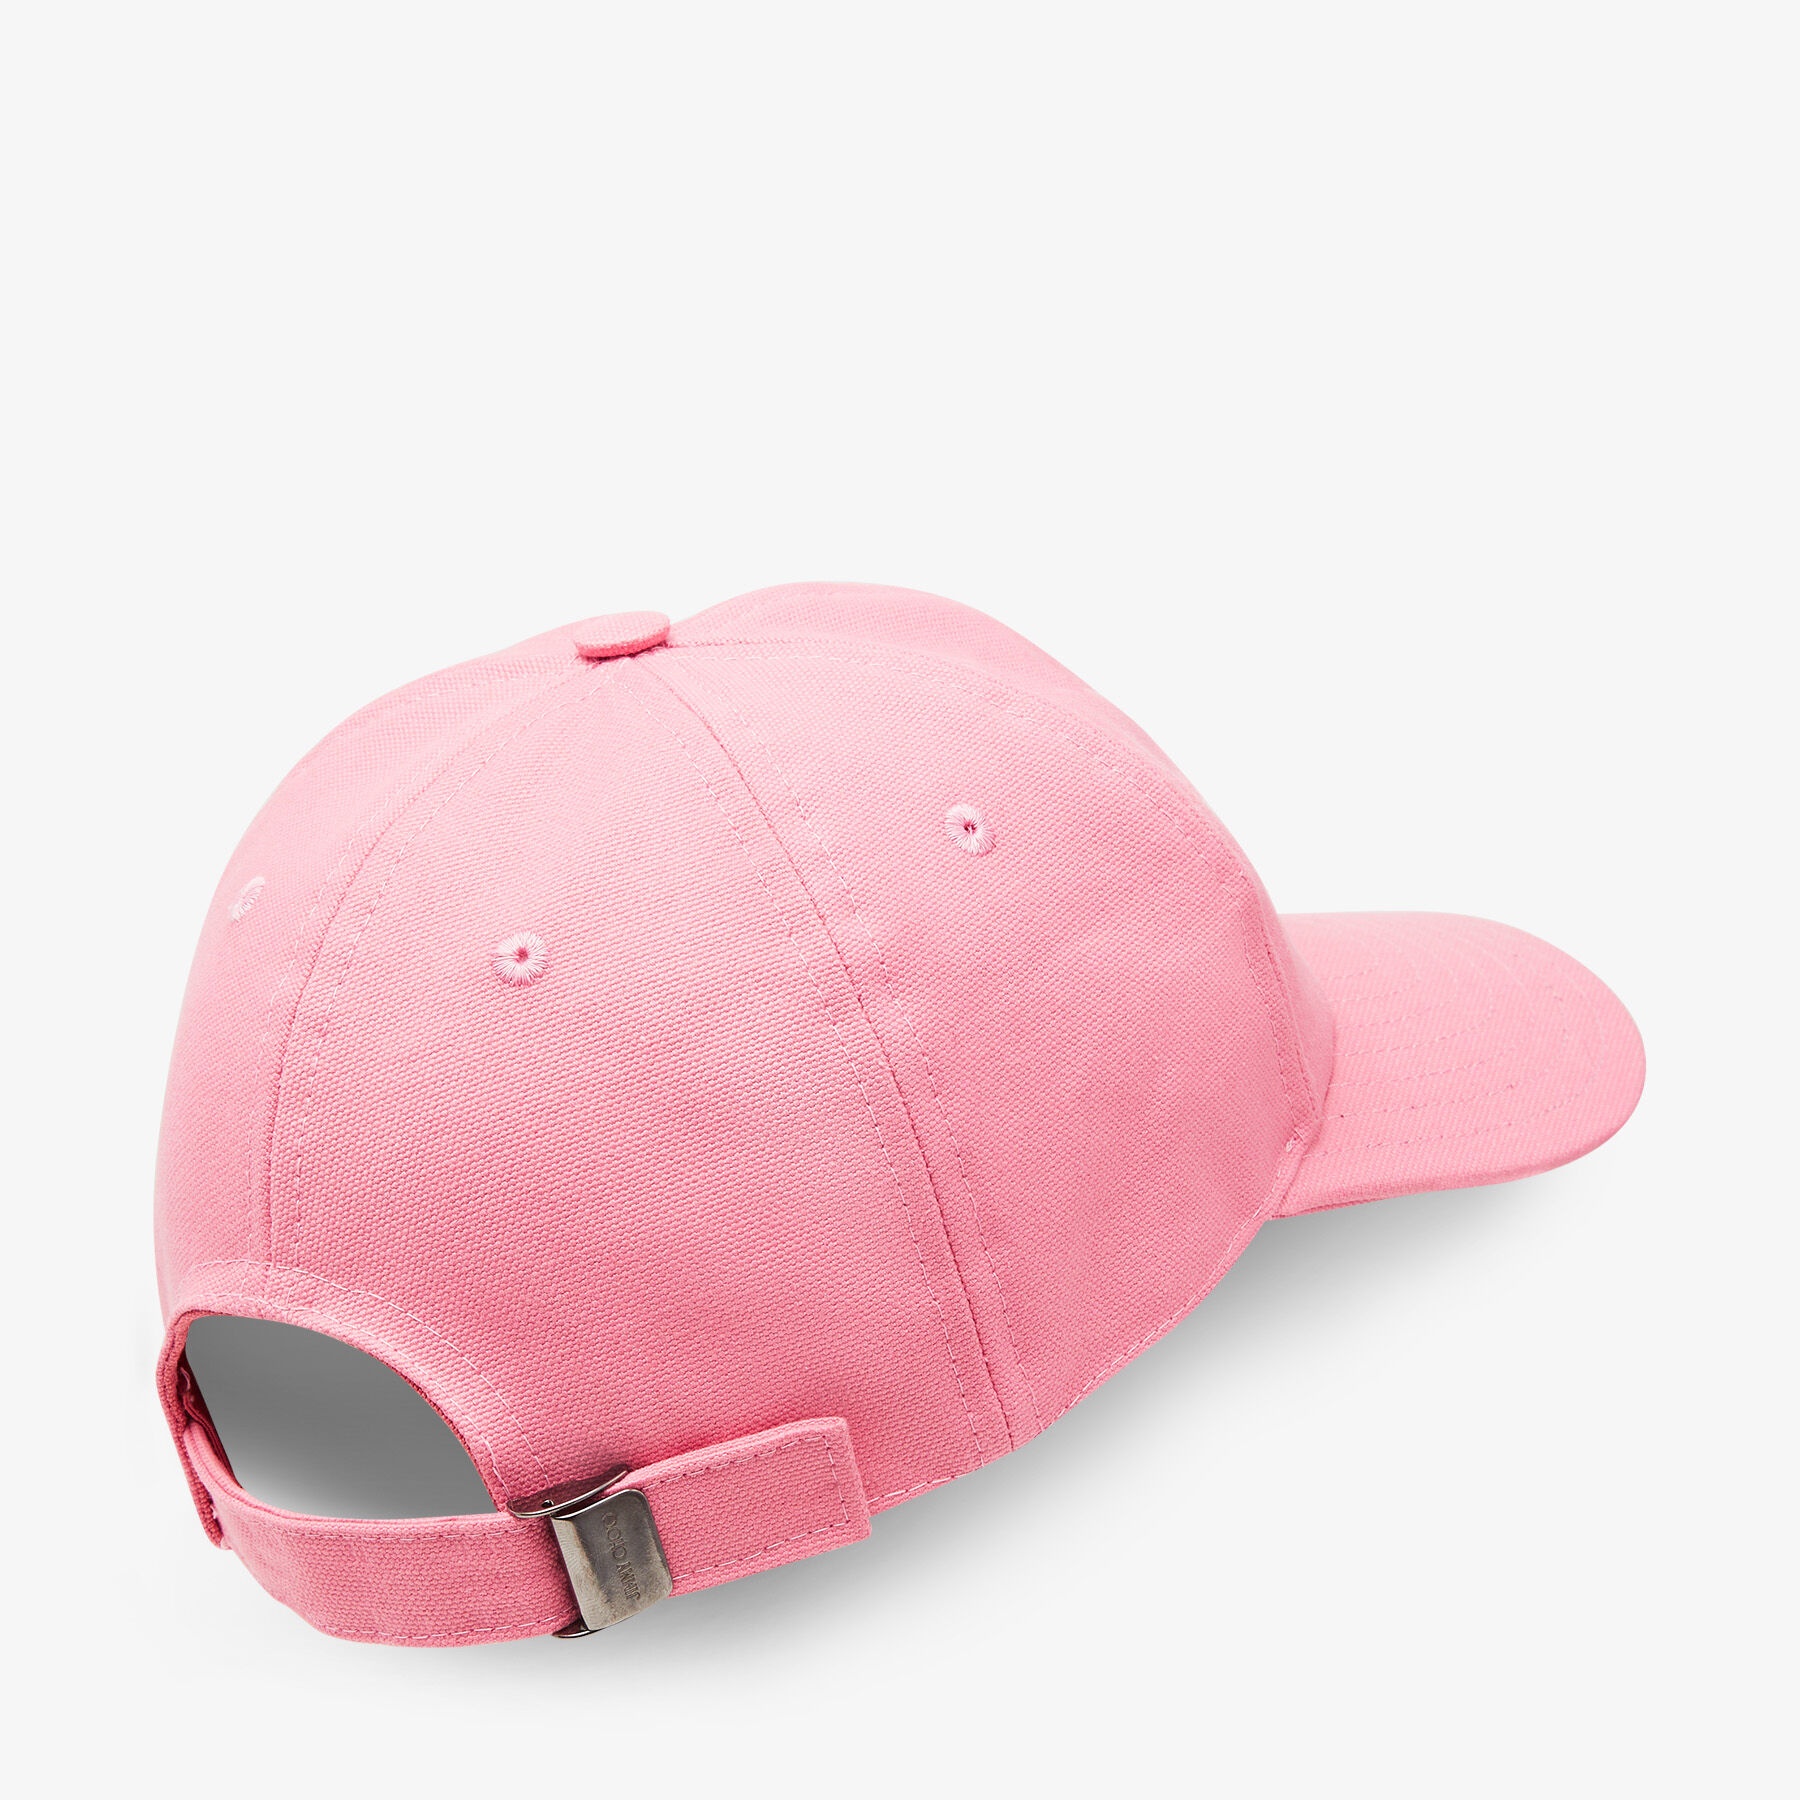 Paxy
Candy Pink Cotton Baseball Cap with Shiny JC Monogram - 3